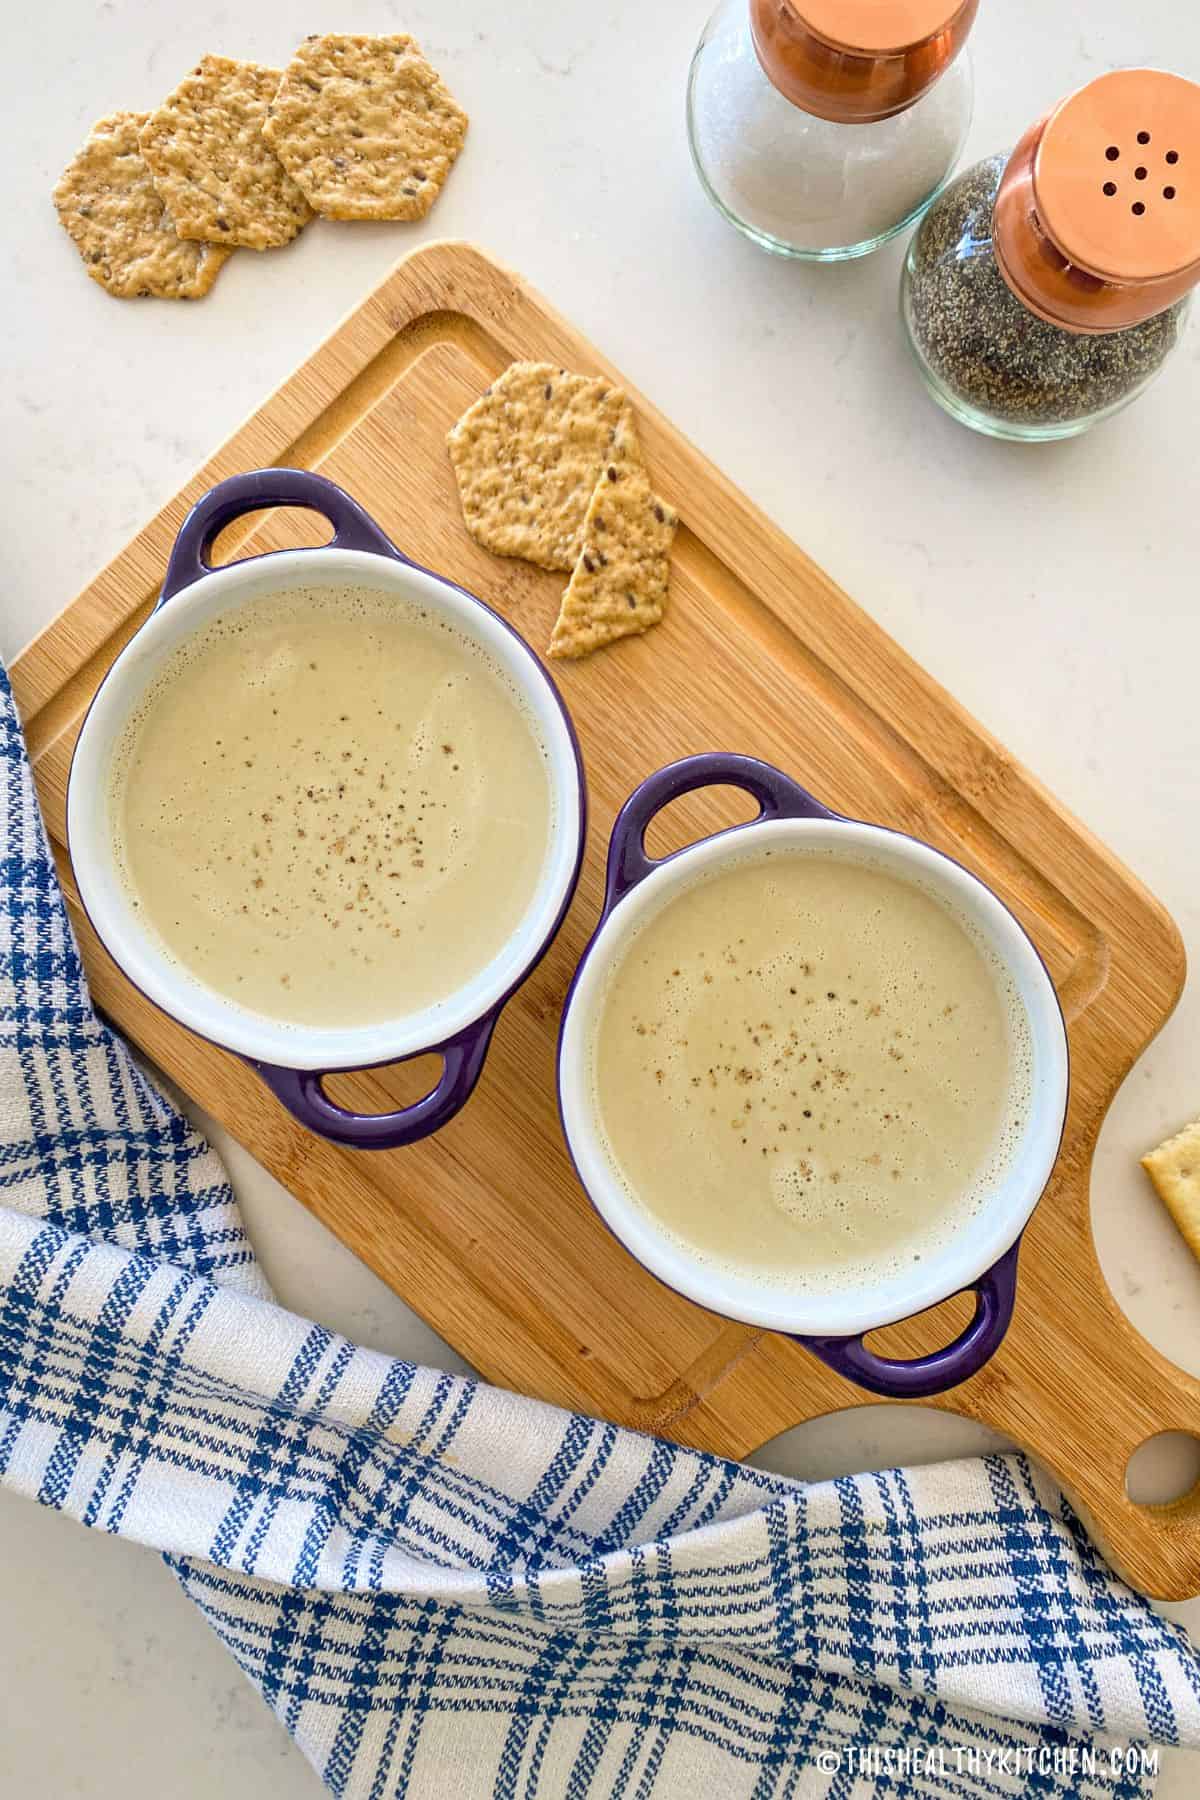 Two bowls of creamy soup with crackers beside them.